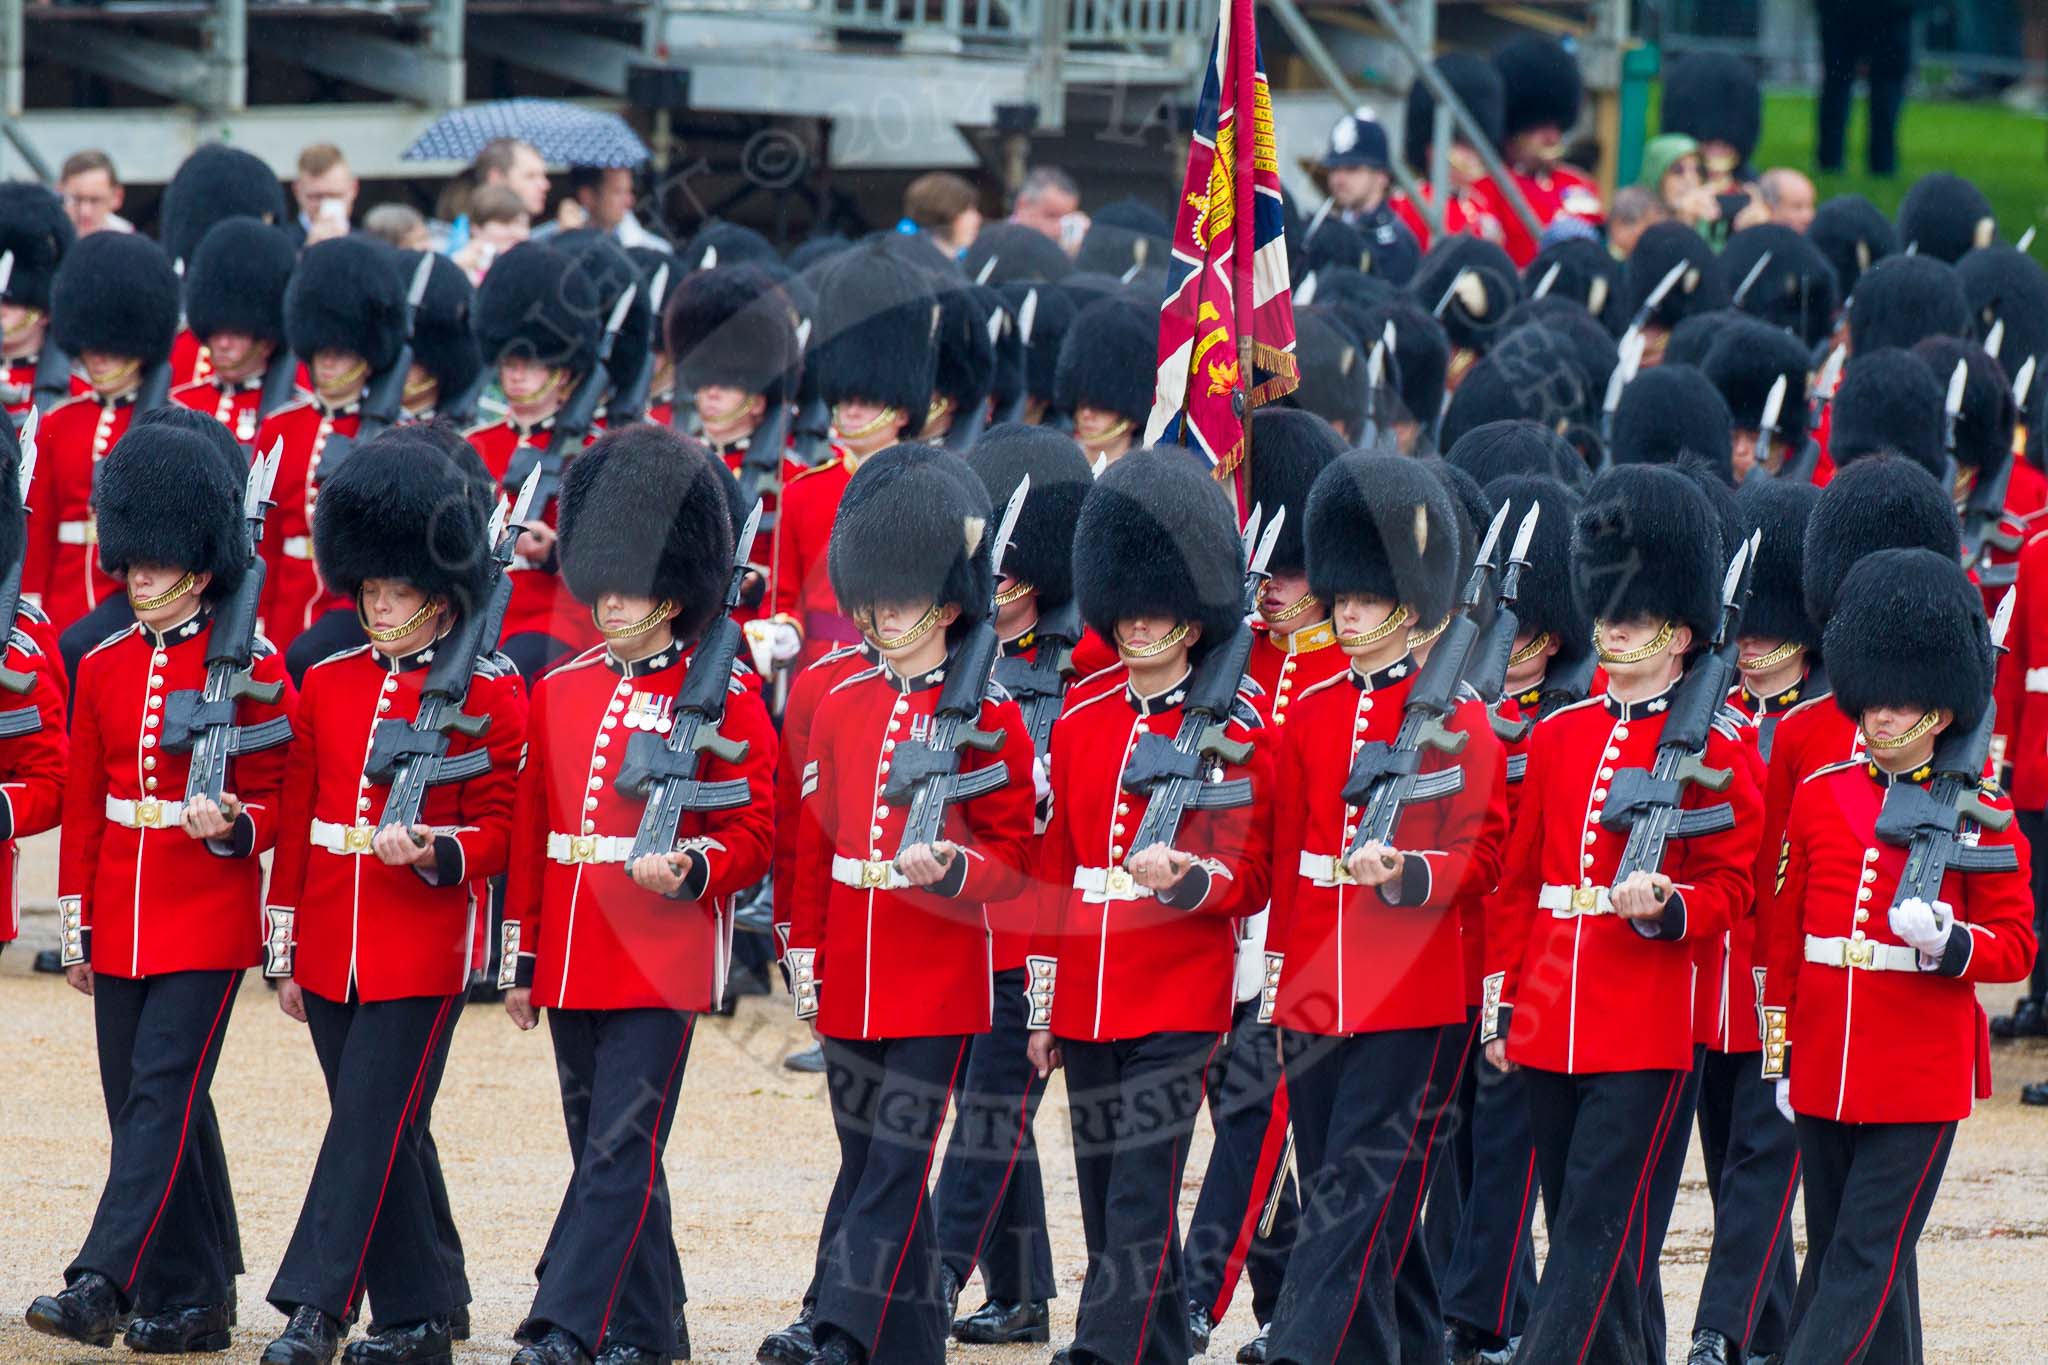 The Colonel's Review 2014.
Horse Guards Parade, Westminster,
London,

United Kingdom,
on 07 June 2014 at 11:32, image #472